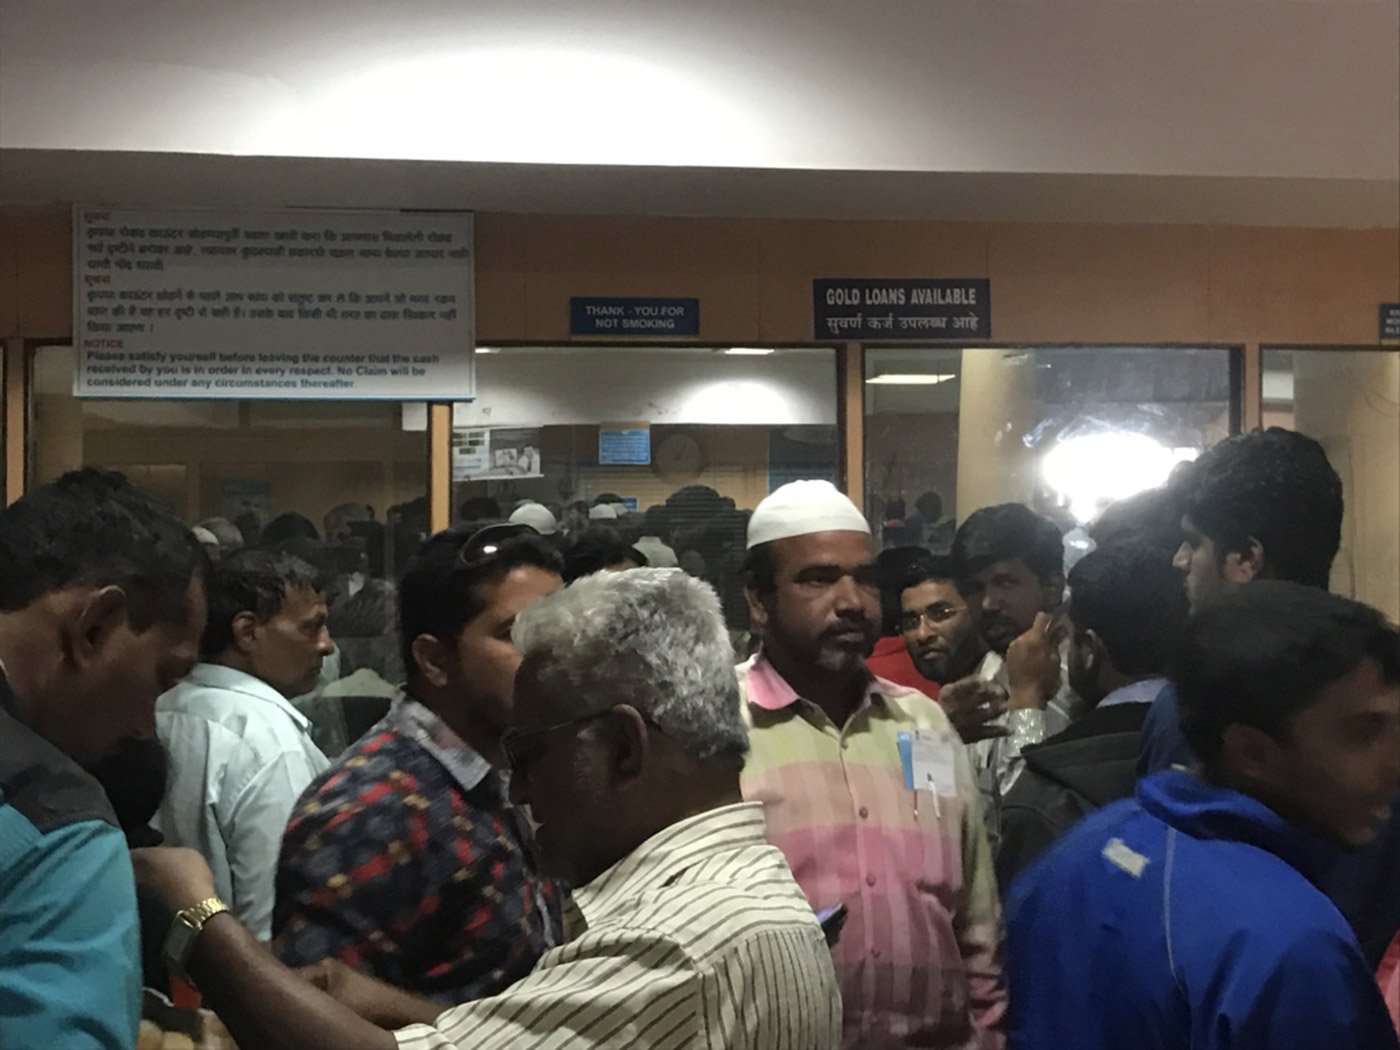 Frustrated members of the public throng the inside of the Shahganj branch of the State Bank of Hyderabad. Outside, the queue is nearly a kilometre long